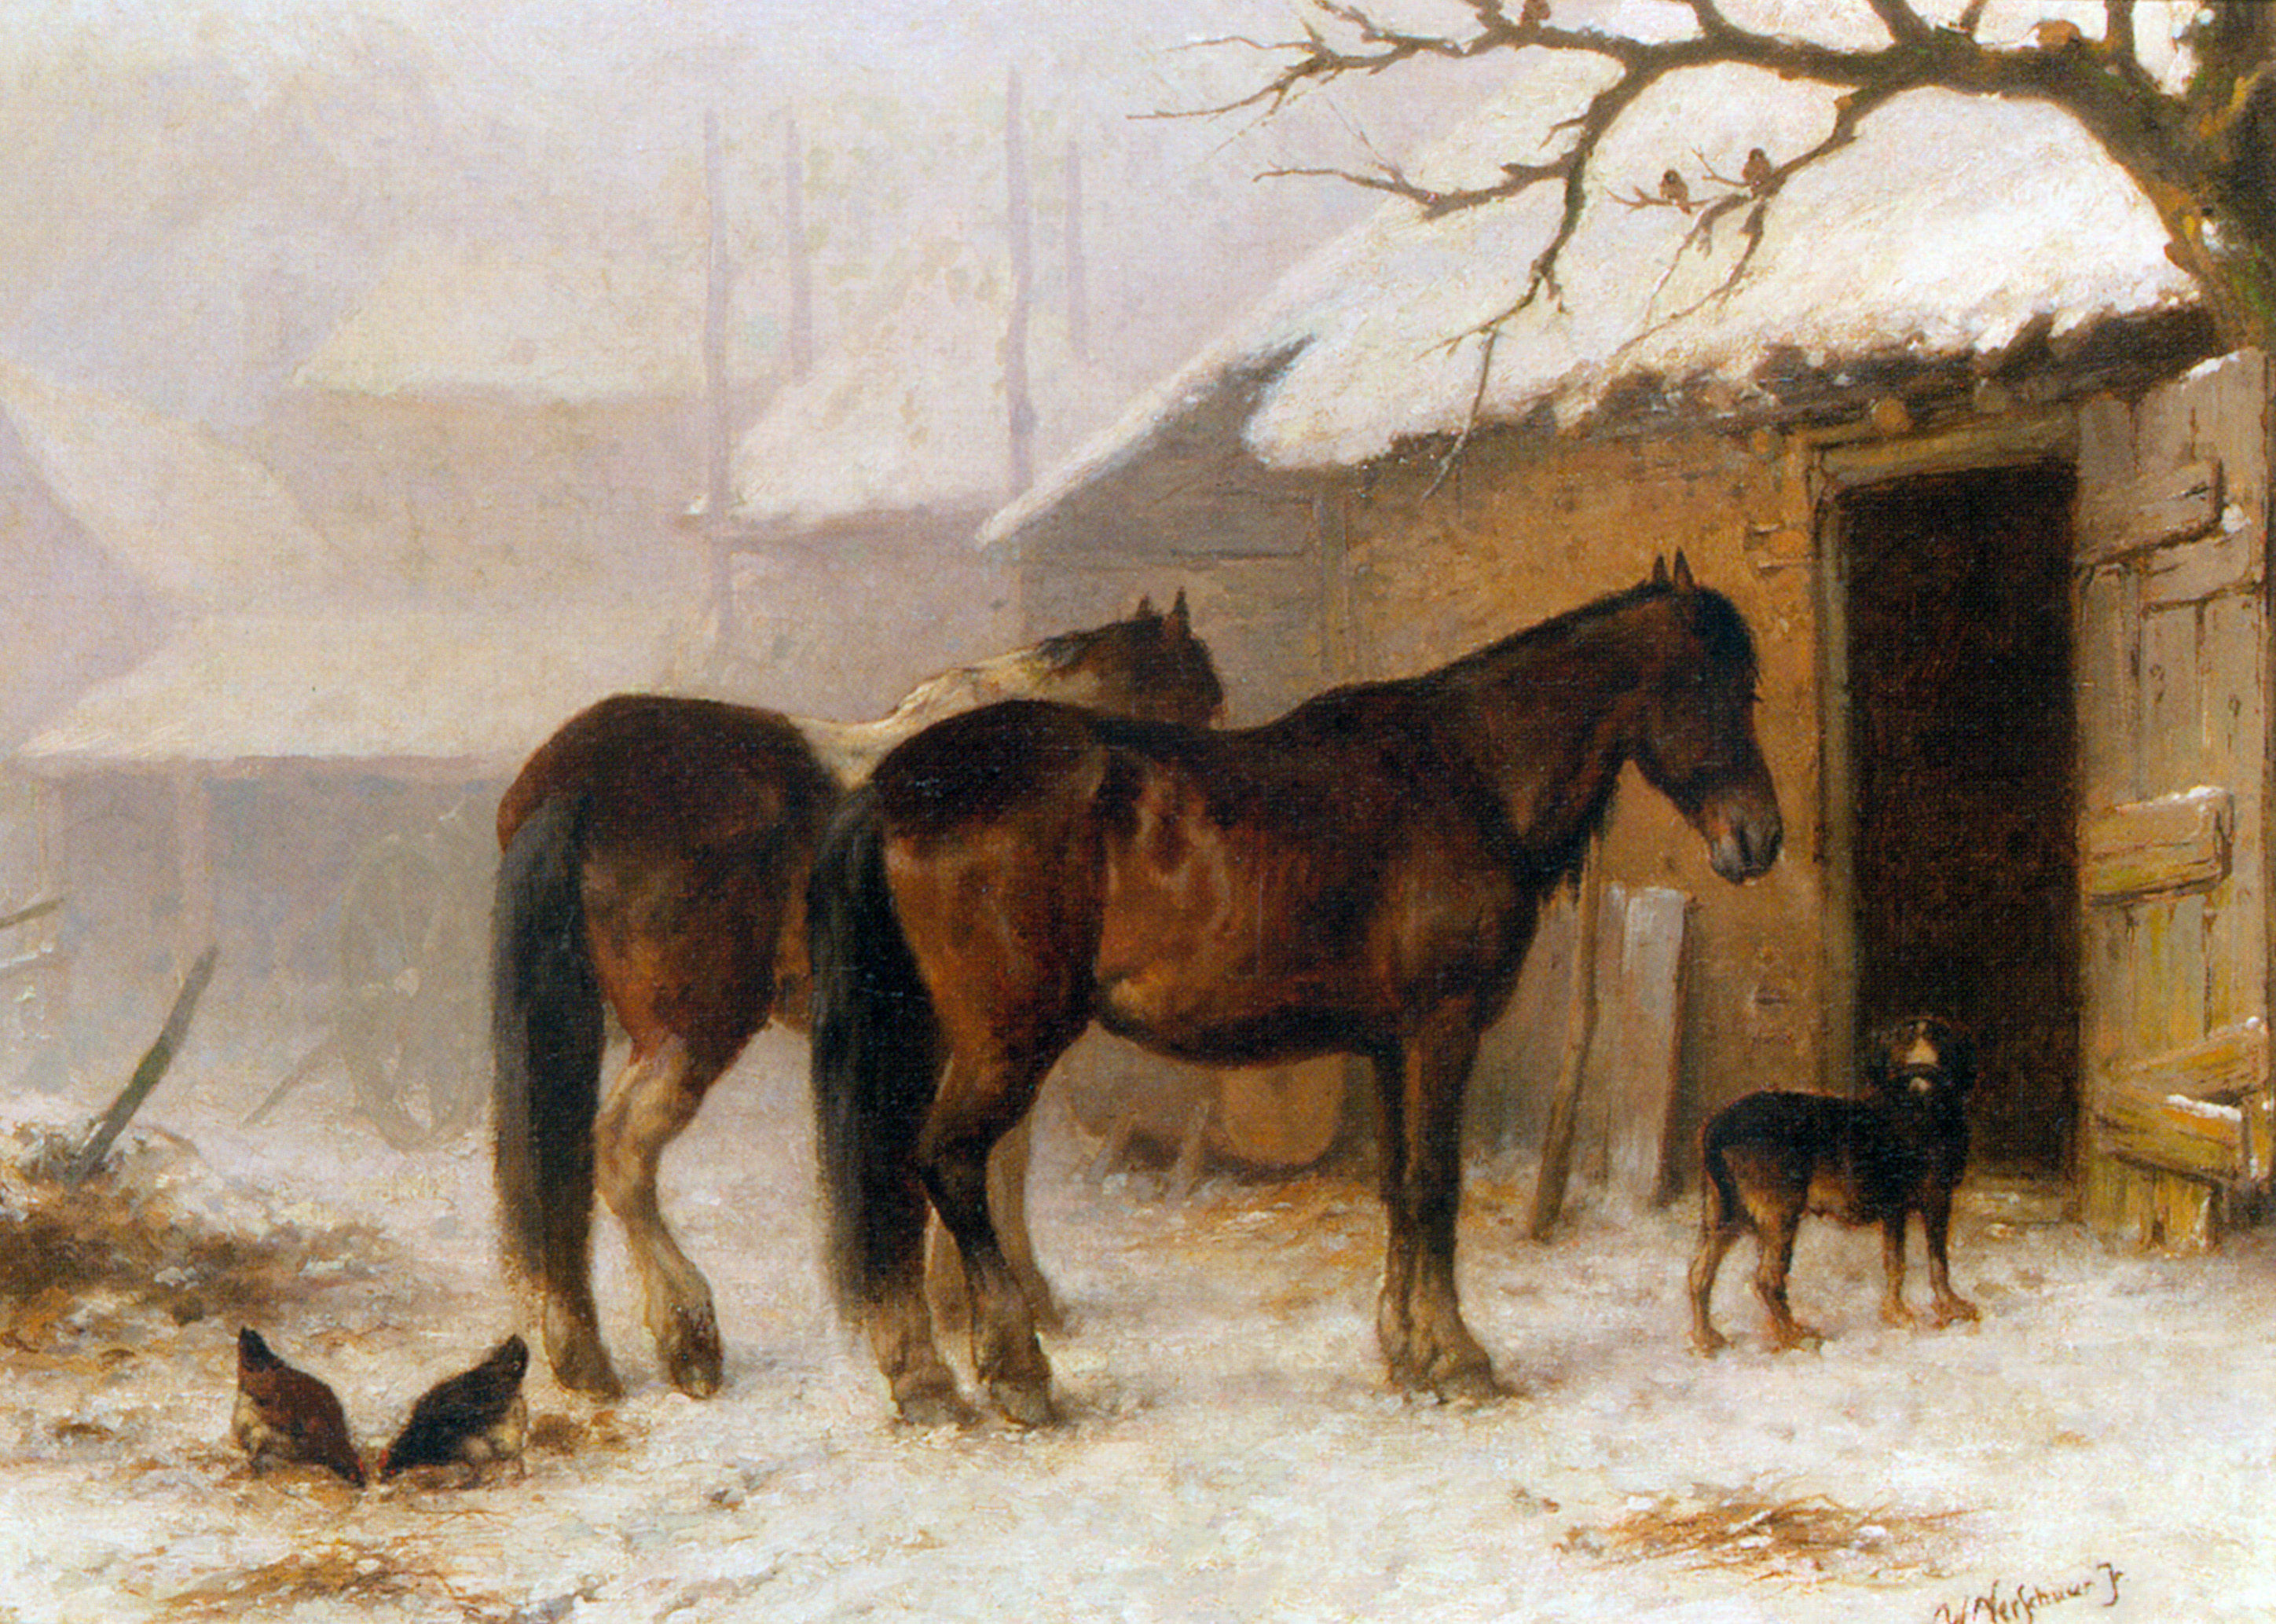 Horses in a Snow Covered Farm Yard by Wouterus Verschuur Jr.